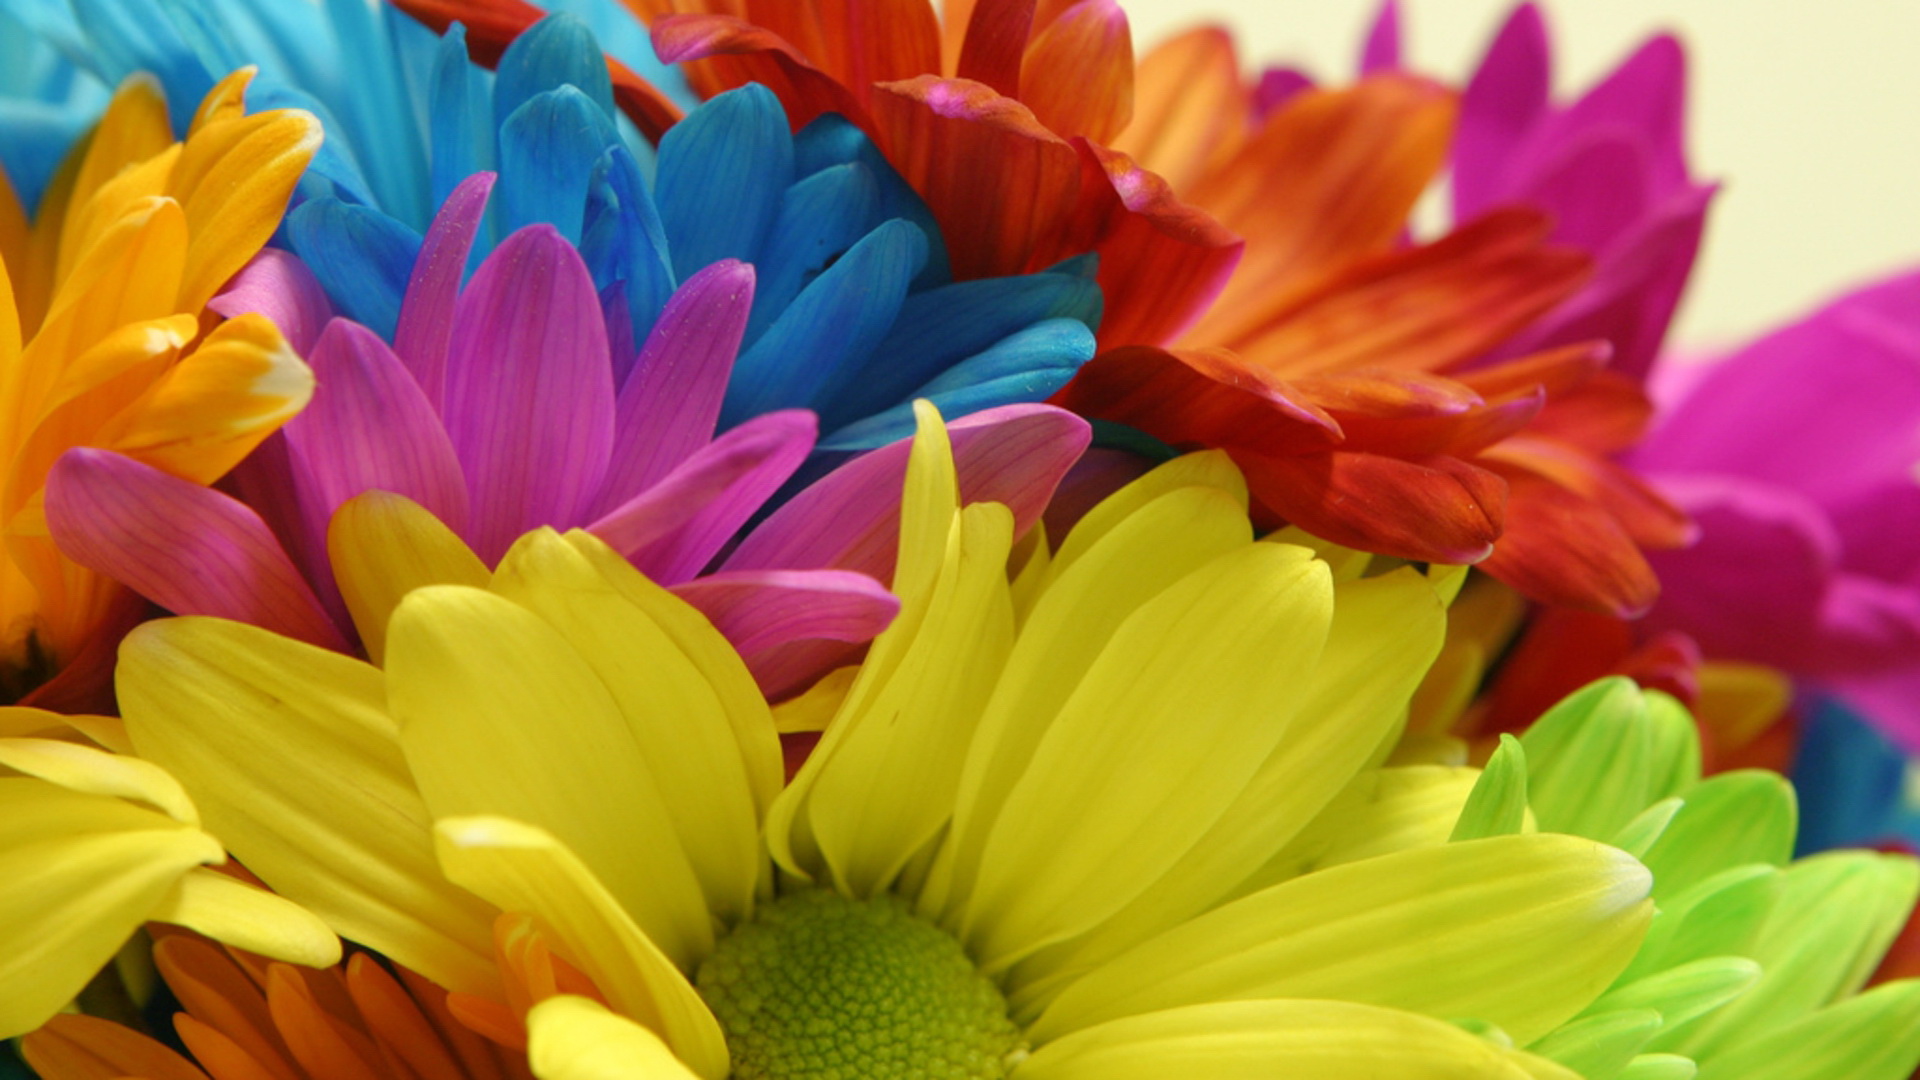 Free pictures of colorful flowers   RR collections